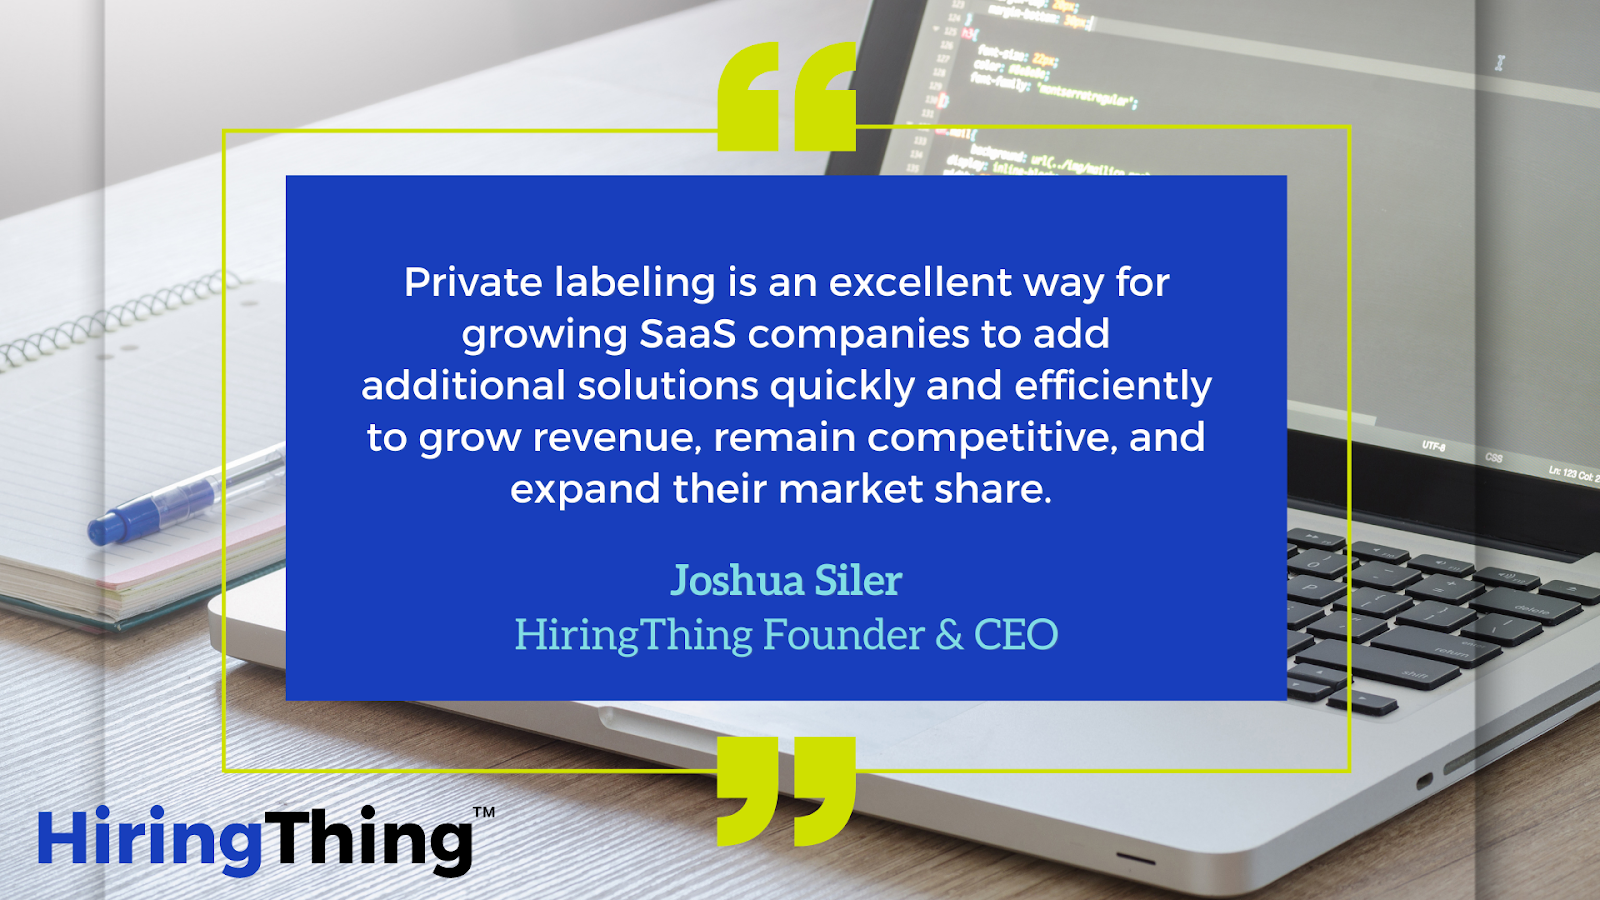 This image is a quote about why growing SaaS companies should private label from HiringThing CEO Joshua Siler